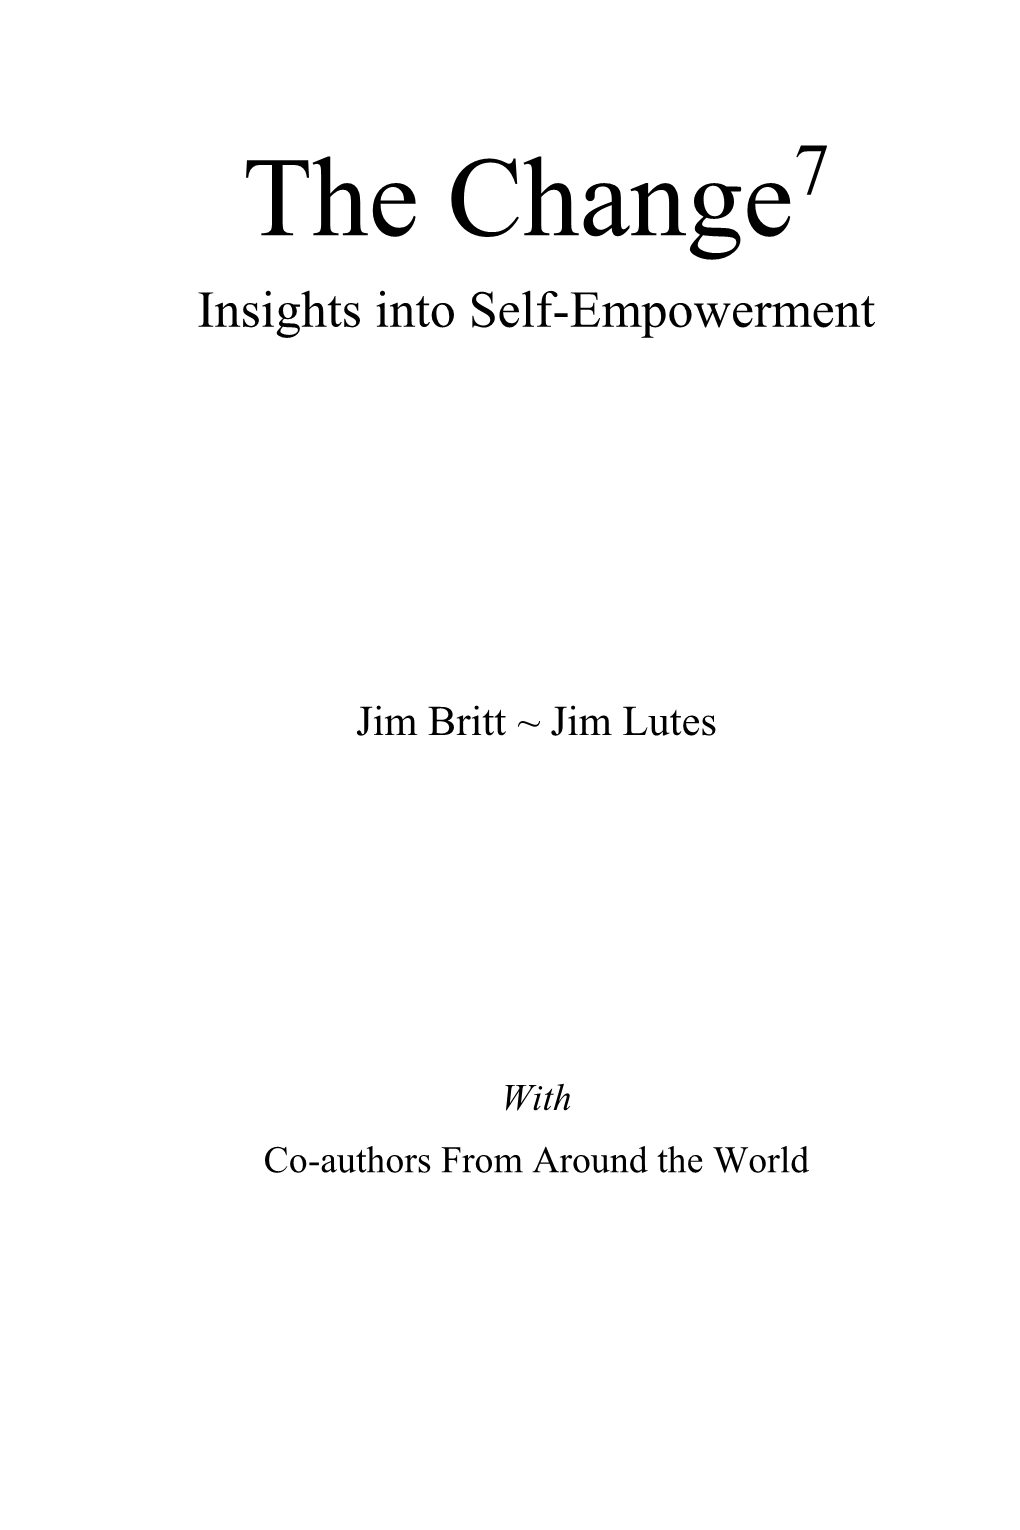 The Change7 Insights Into Self-Empowerment